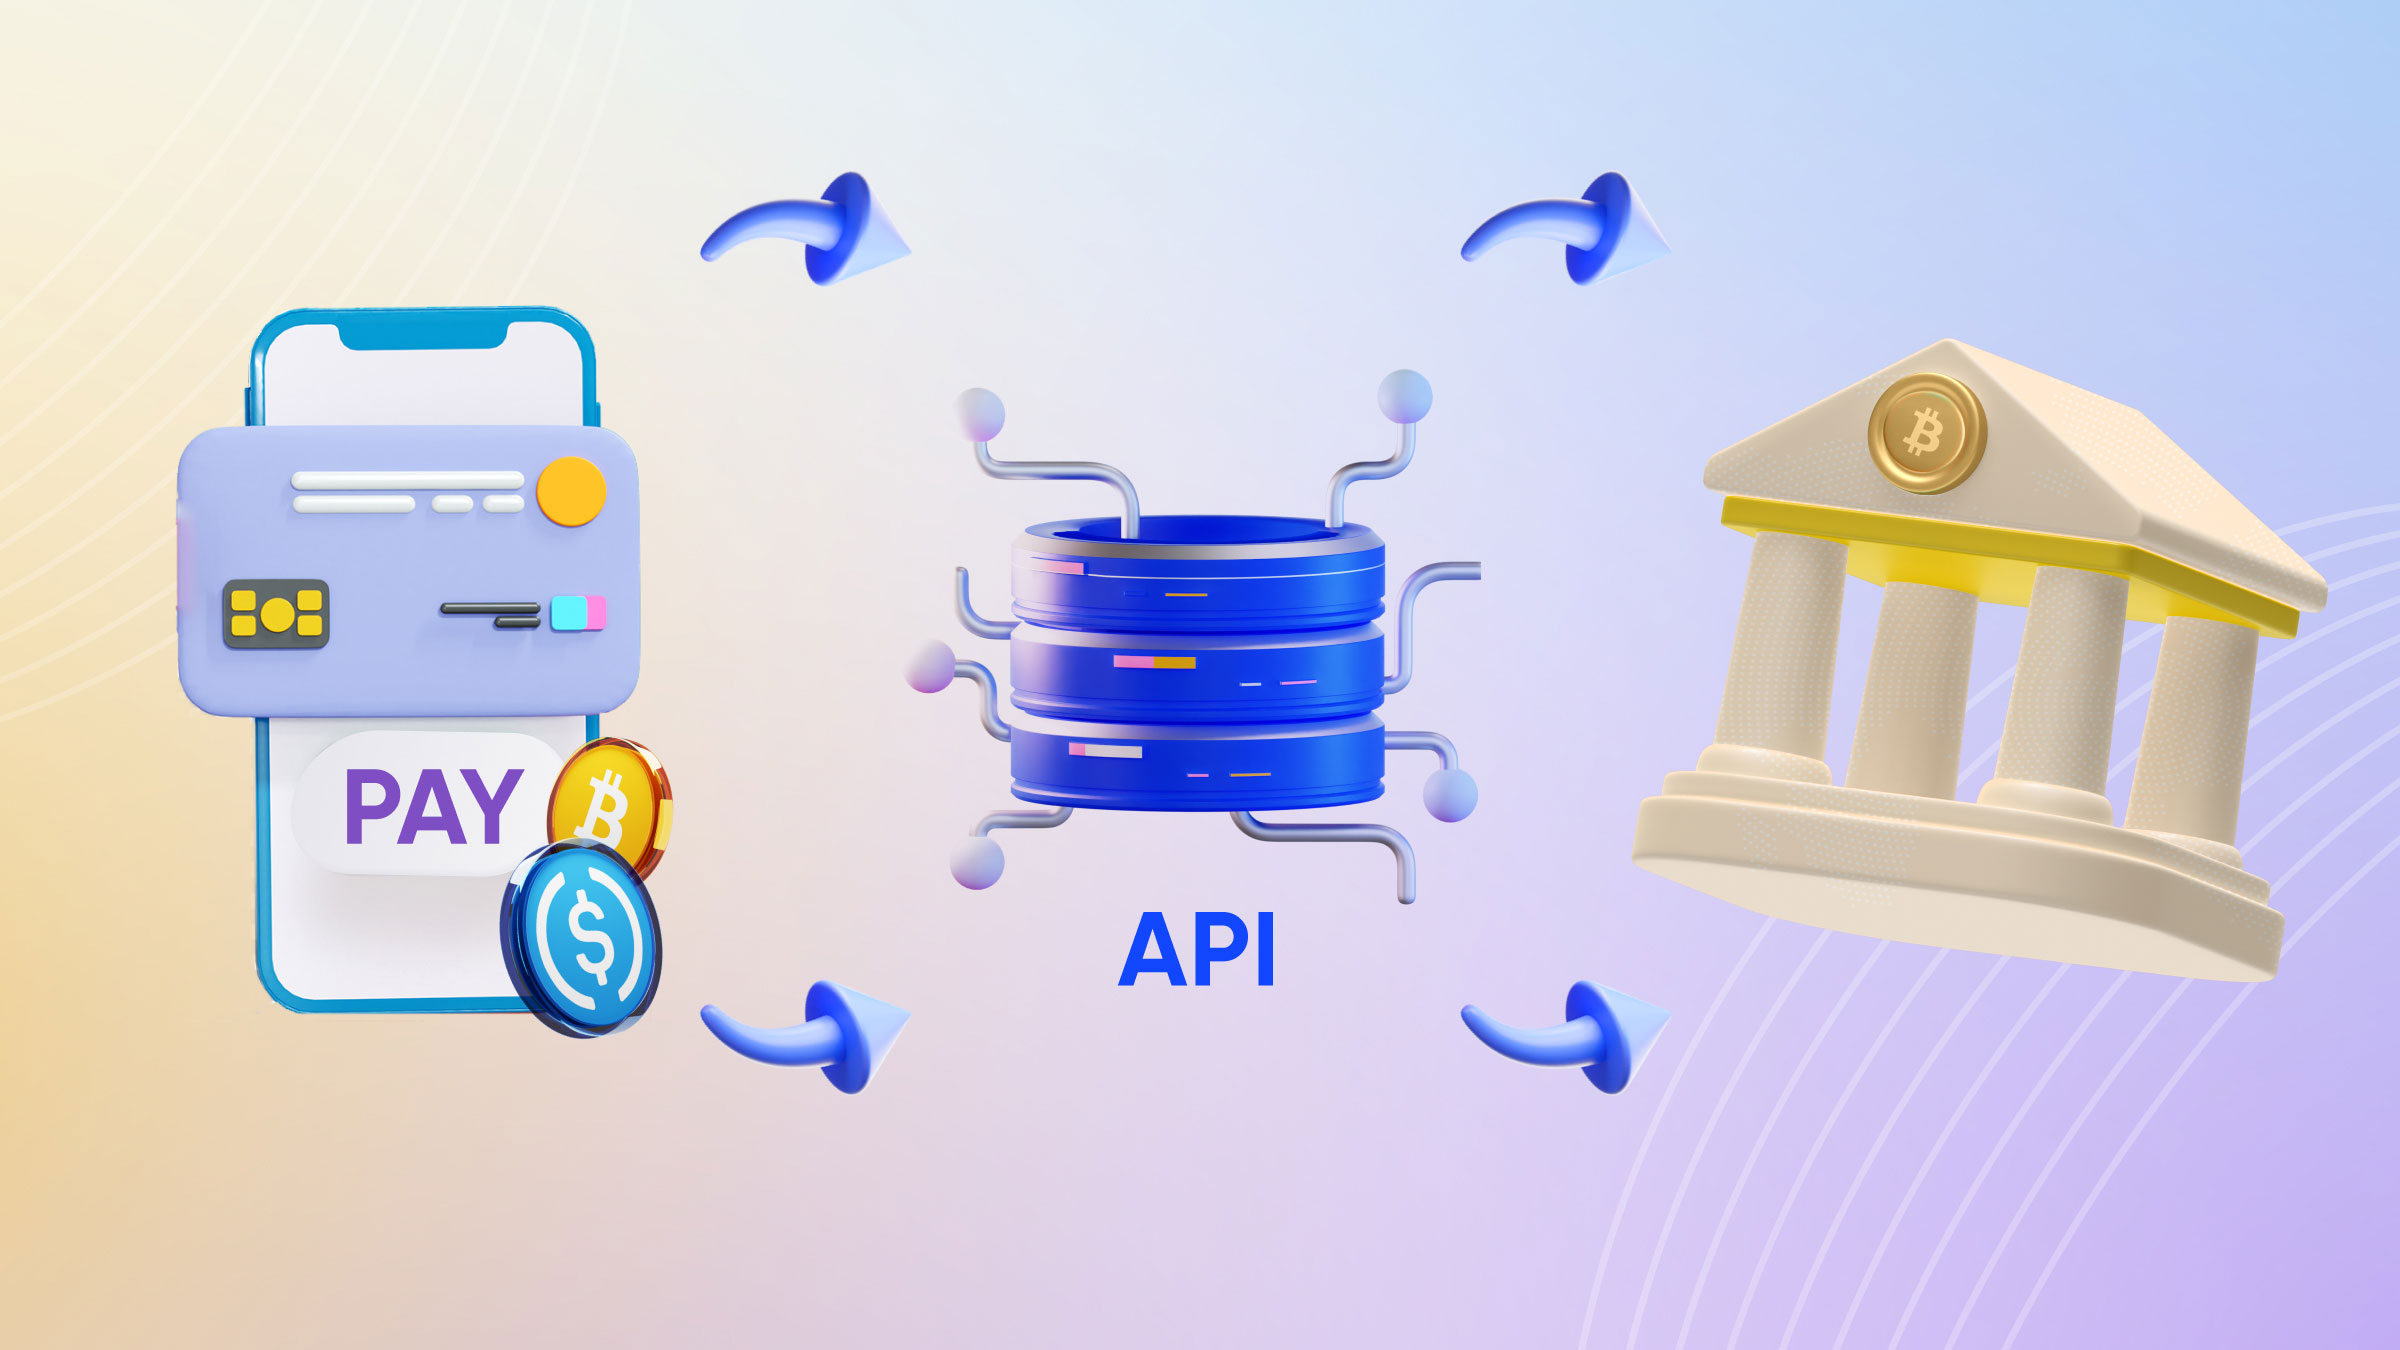 With the API, you can easily start accepting payments in your mobile app.